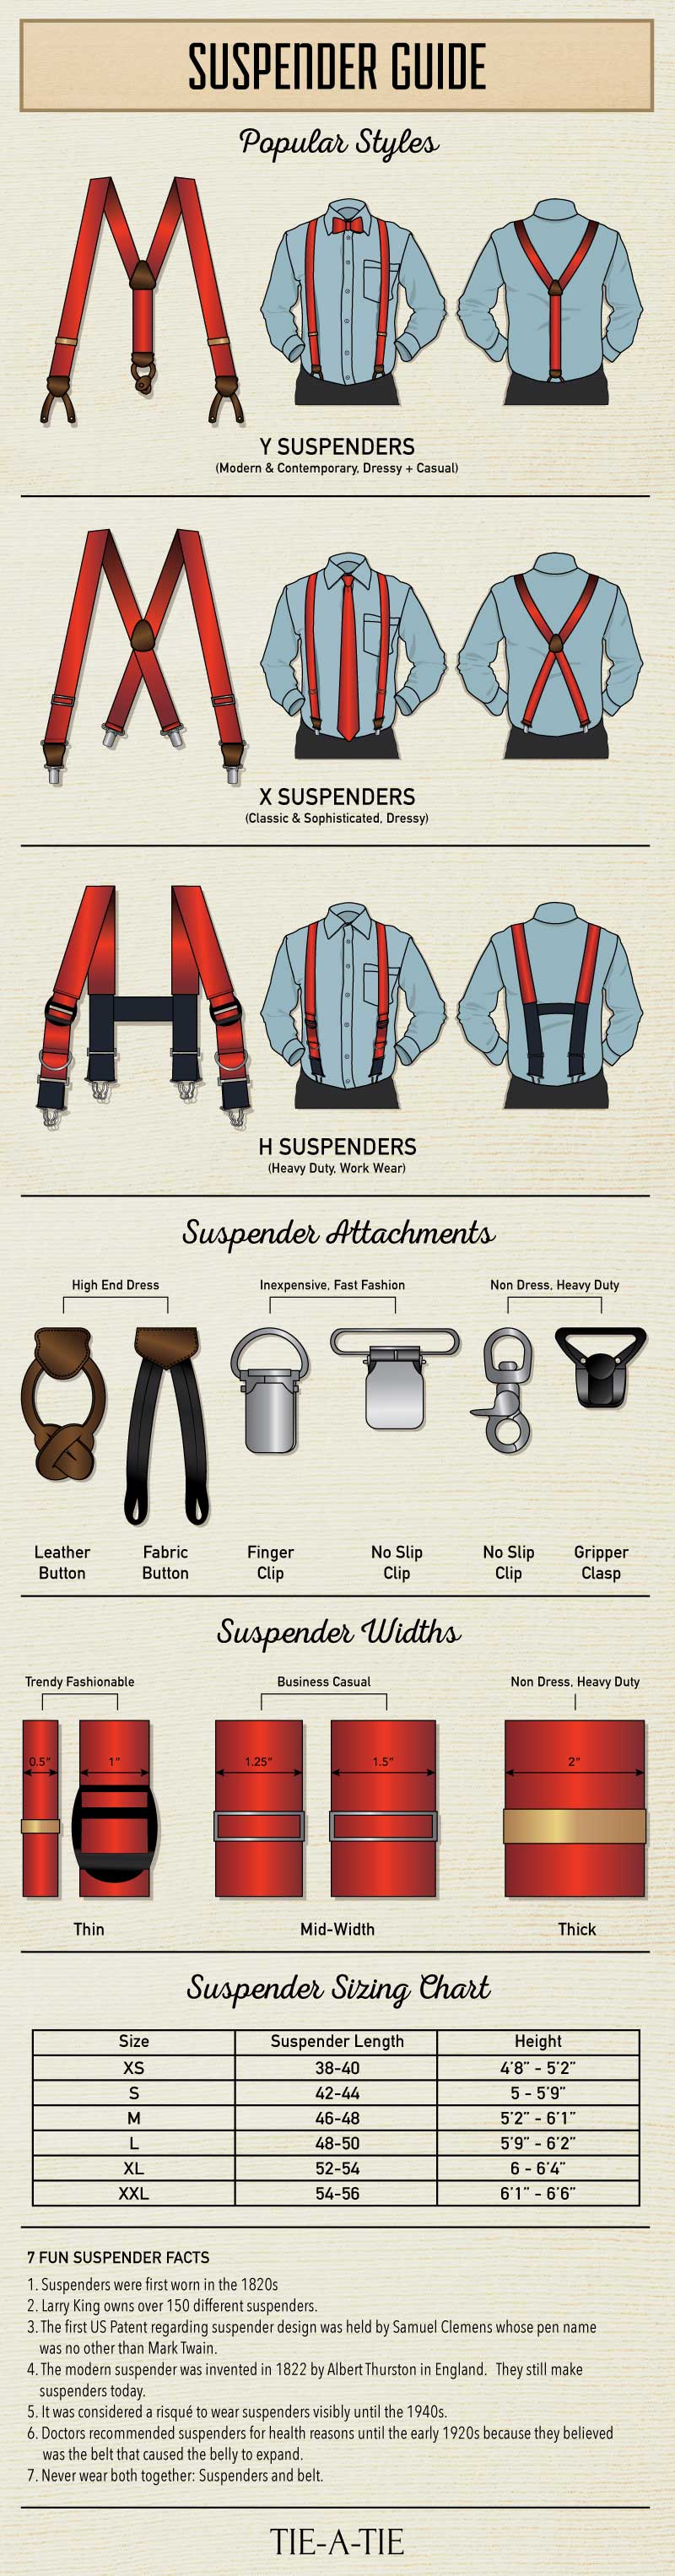 guide on how to wear suspenders